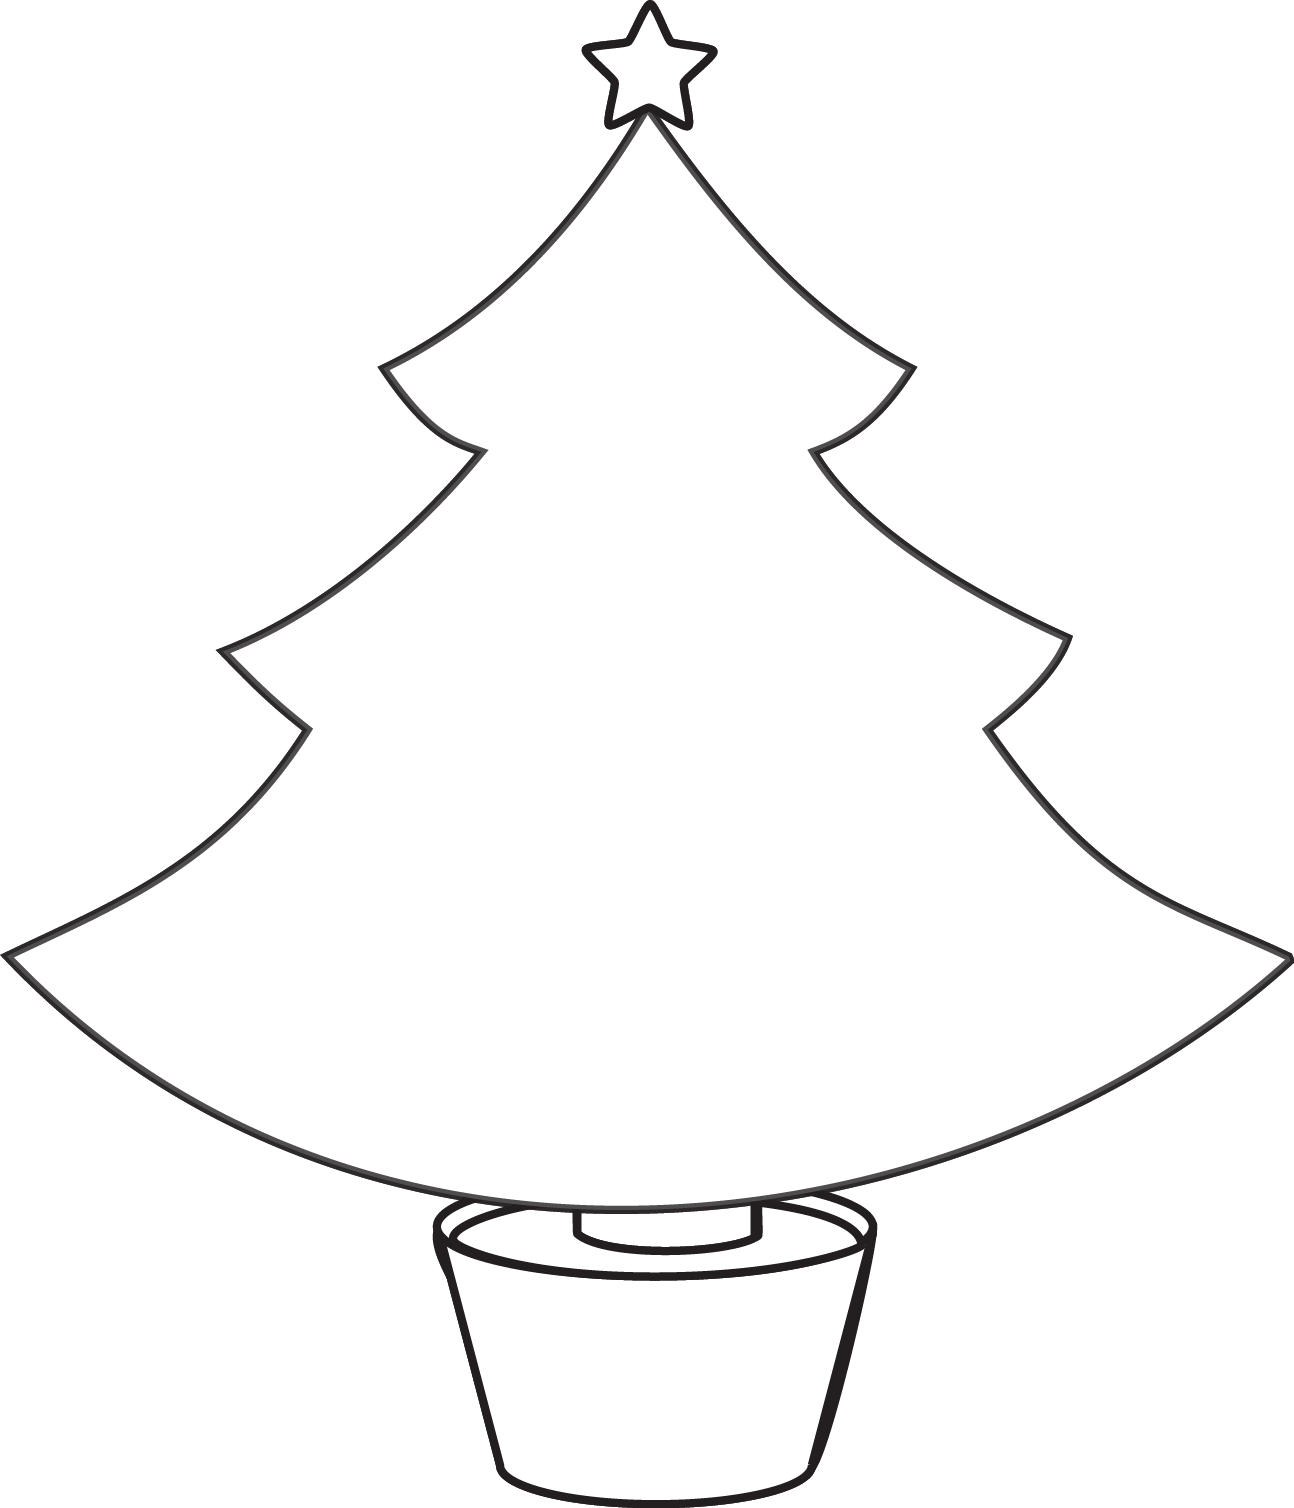 Outline Of A Christmas Tree 